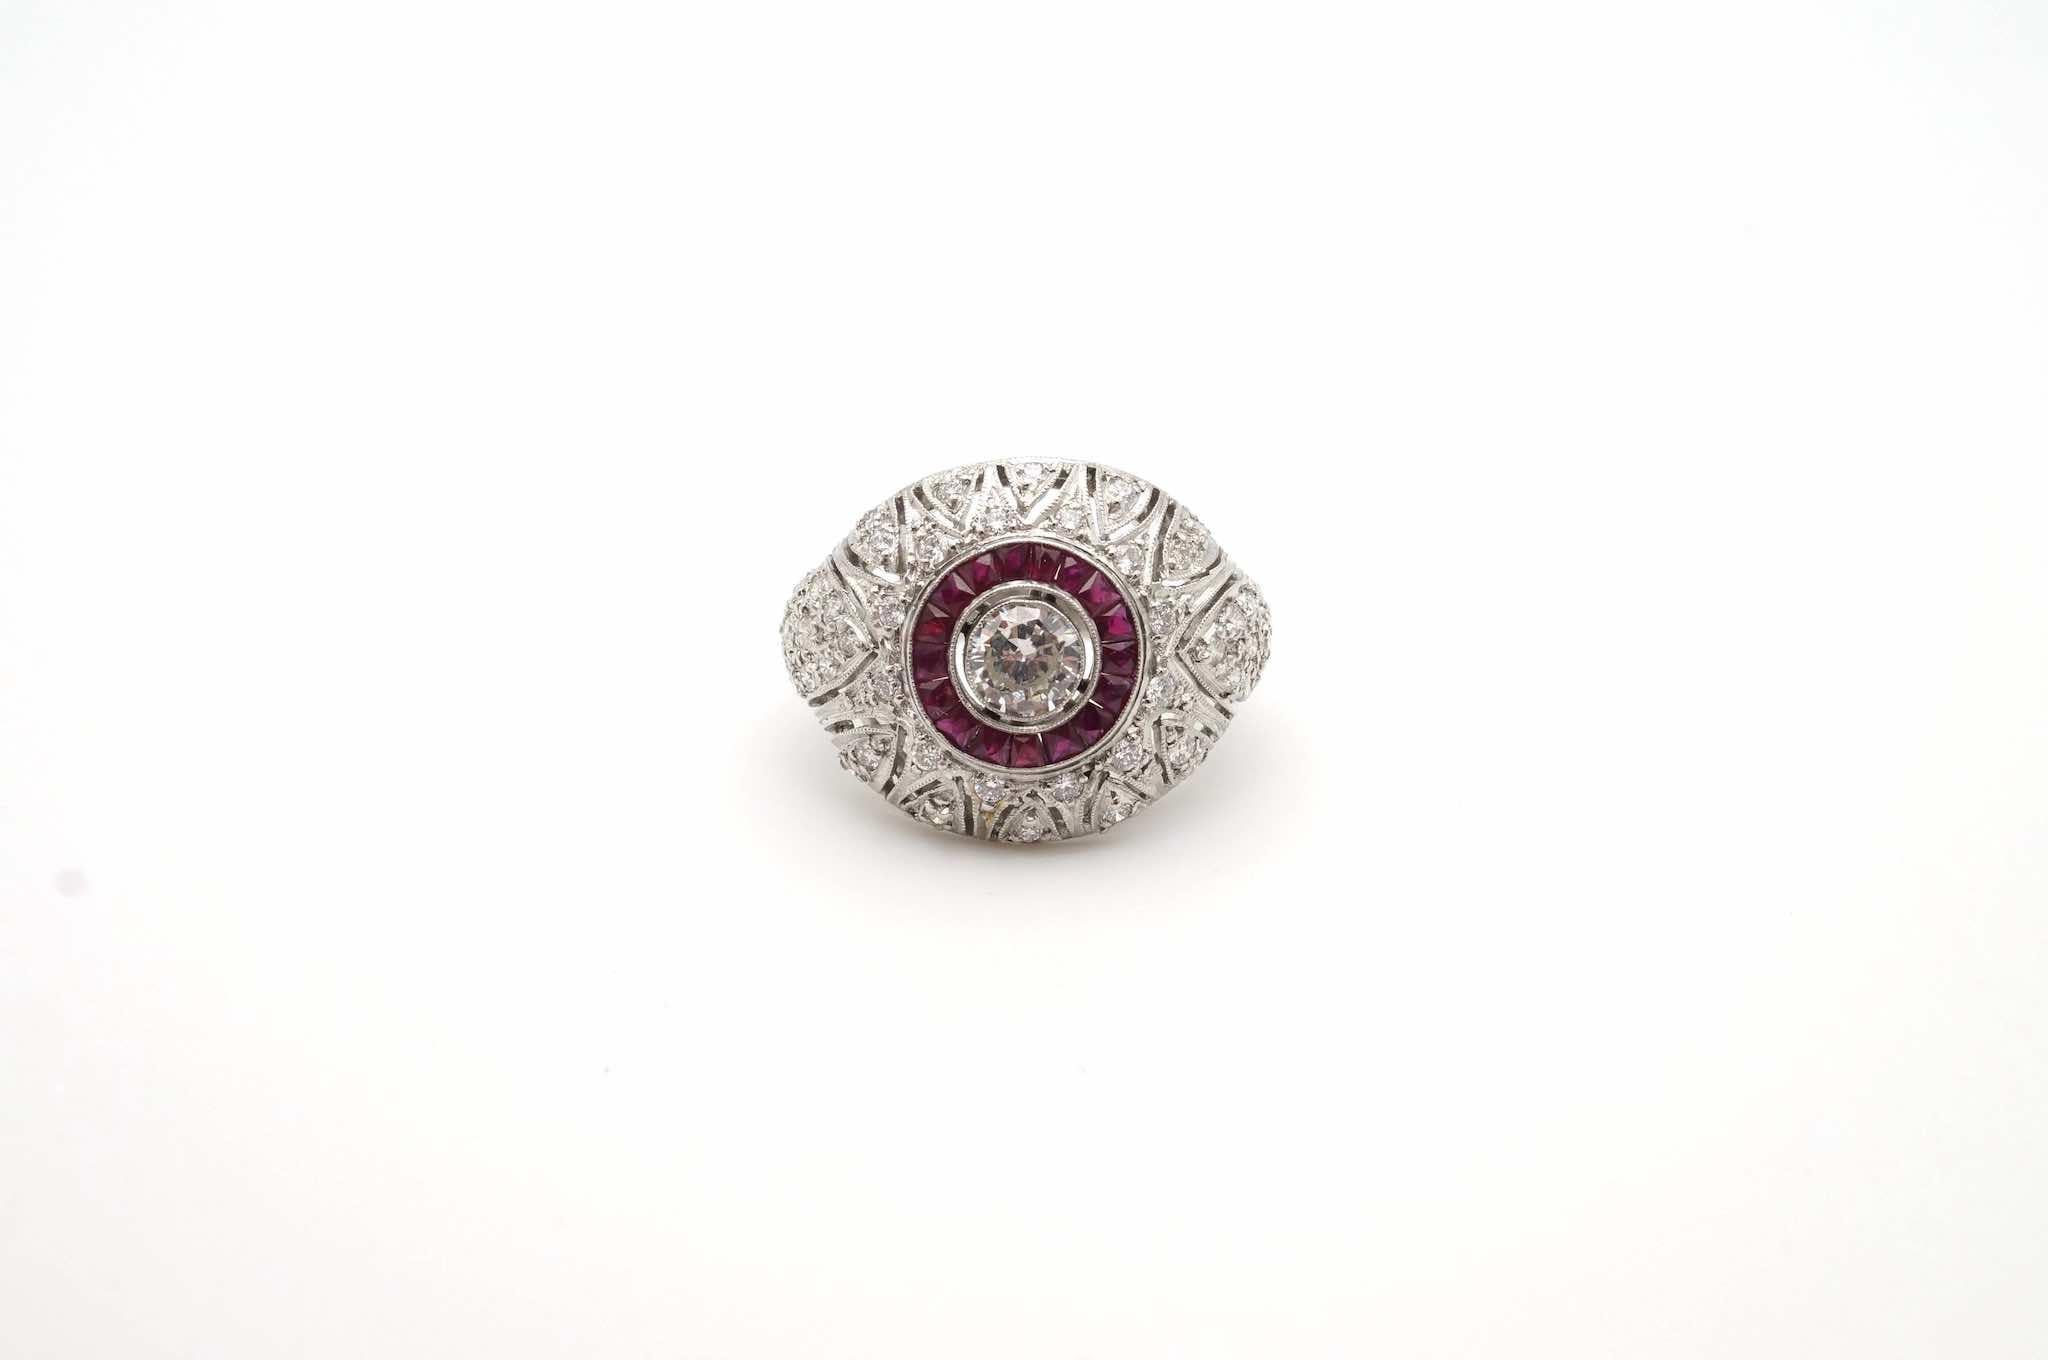 Stones: Diamonds for a total weight of 0.80 carat
and calibrated rubies.
Material: Platinum
Dimensions: 2cm length on finger x 2.5cm width
Period: 1930
Weight: 9.10g
Size: 53 (free sizing)
Certificate
Ref. : 24716